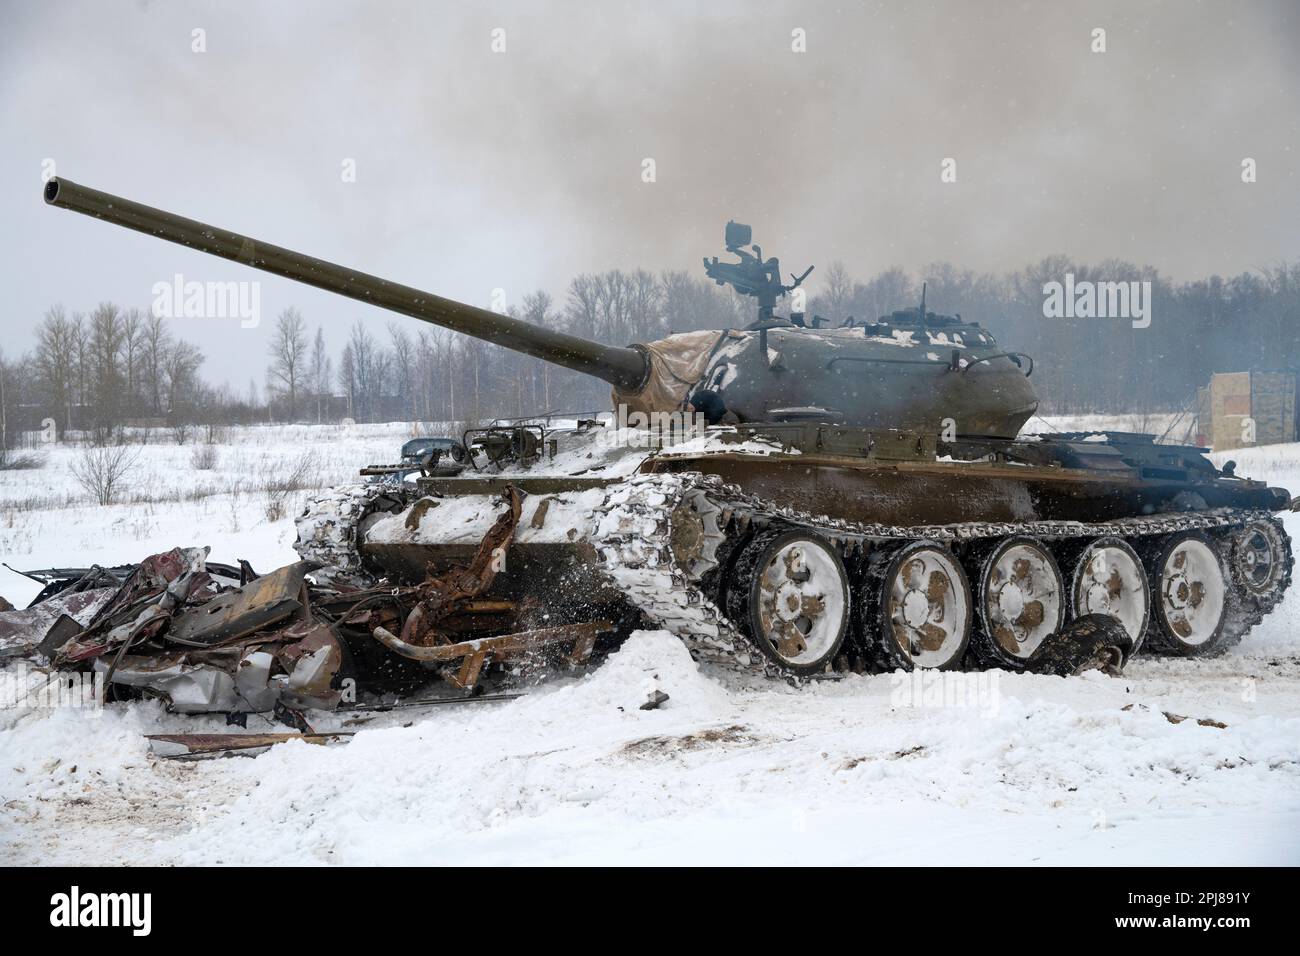 KRASNOYE SELO, RUSSIA - FEBRUARY 19, 2023: A Soviet tank T-54 a close-up on a snowy February day. Training ground of the military-historical park Stock Photo